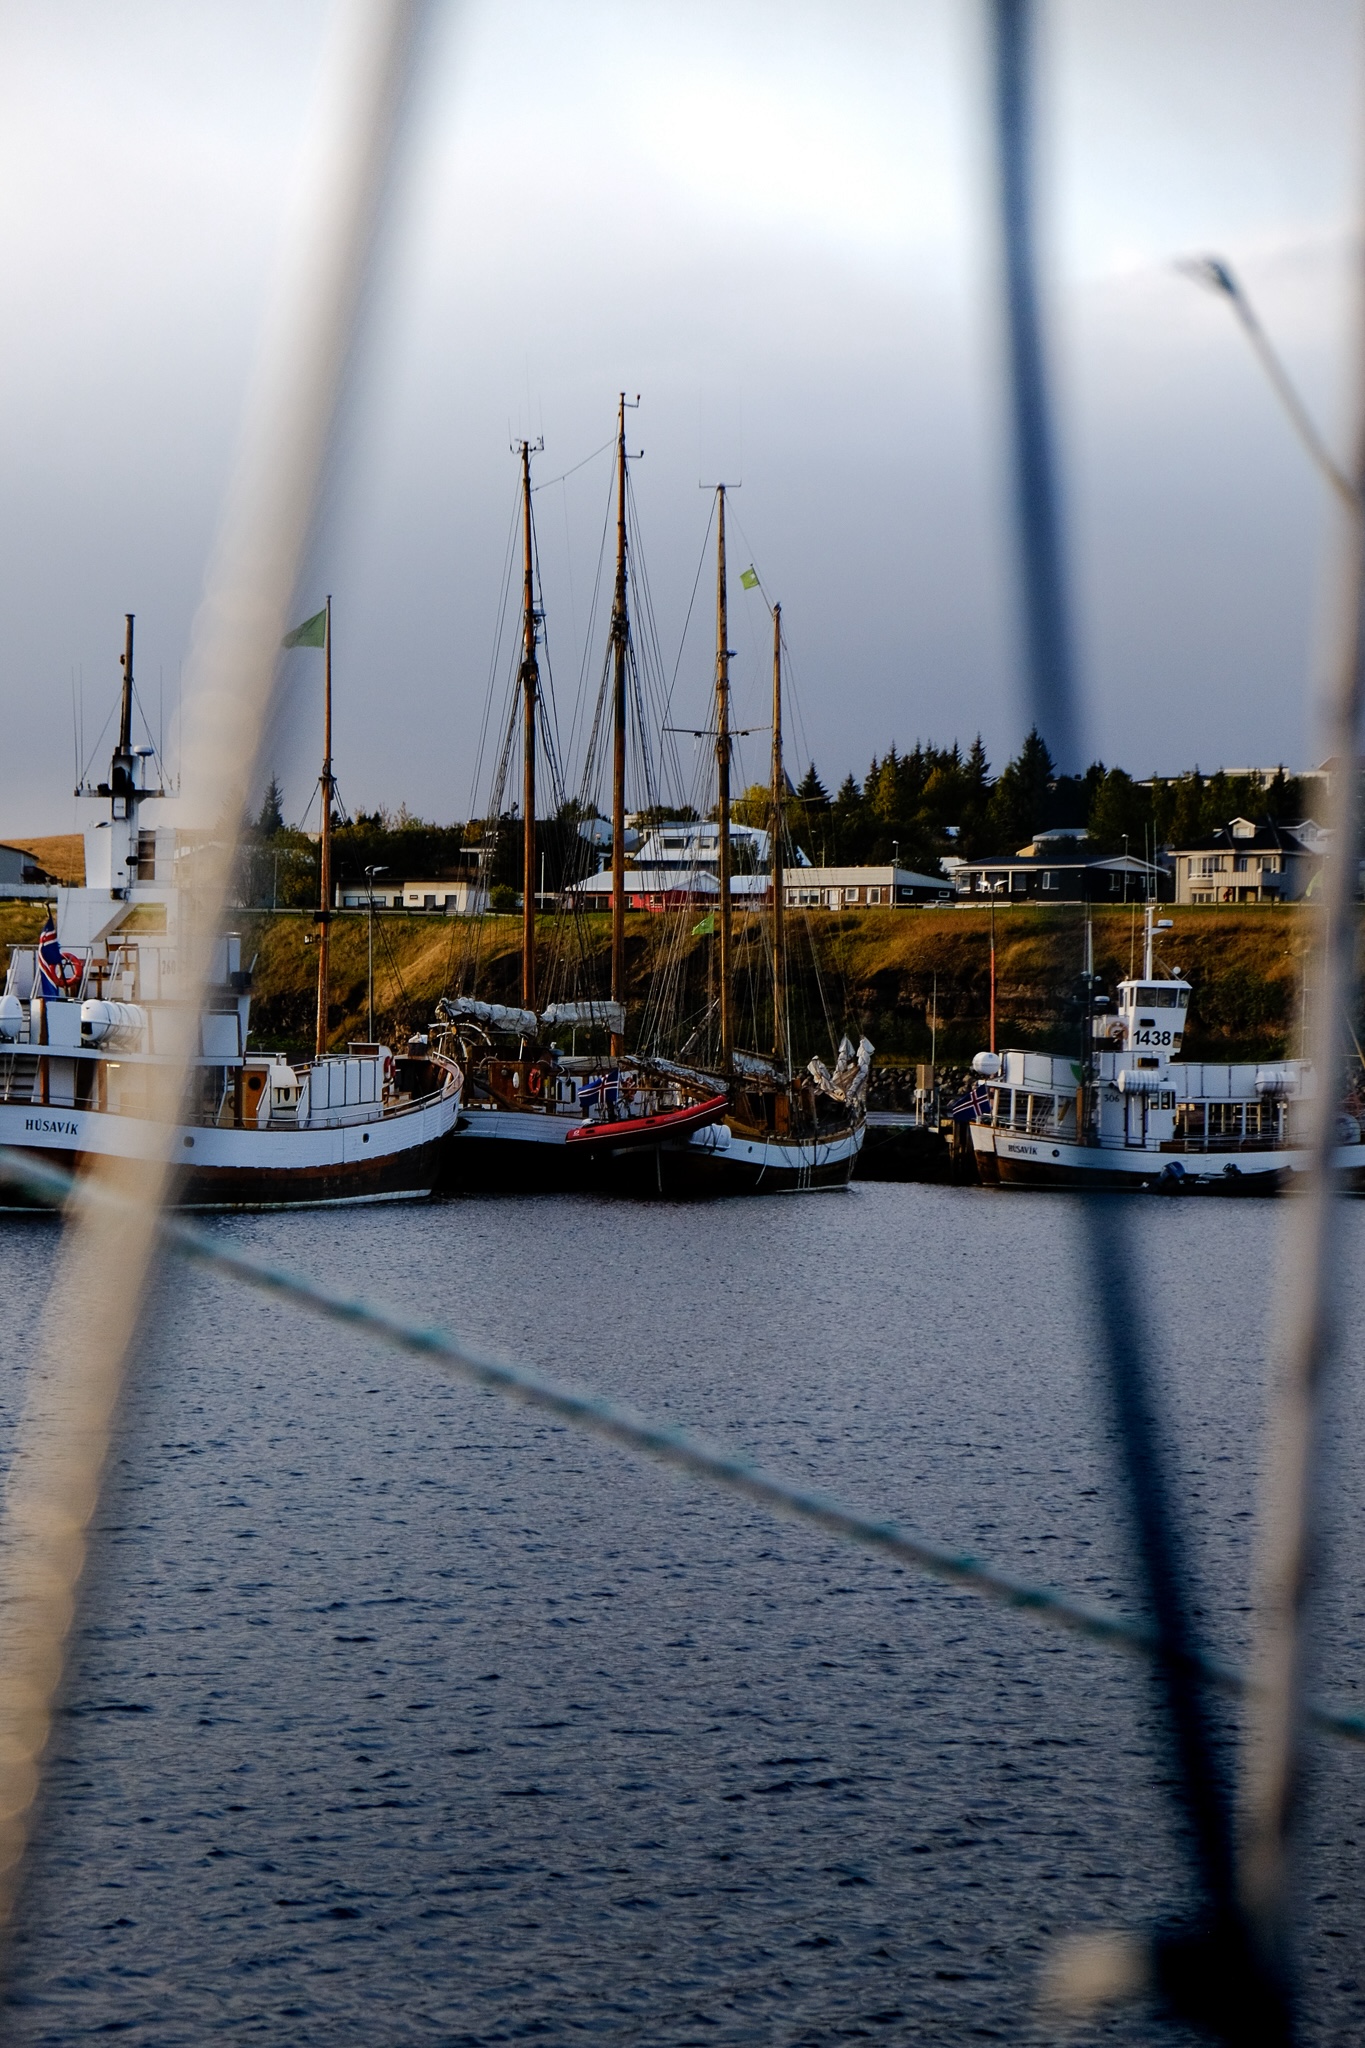 Harbour in Husavik with old wooden boats, the ropes of boat blurred in the foreground